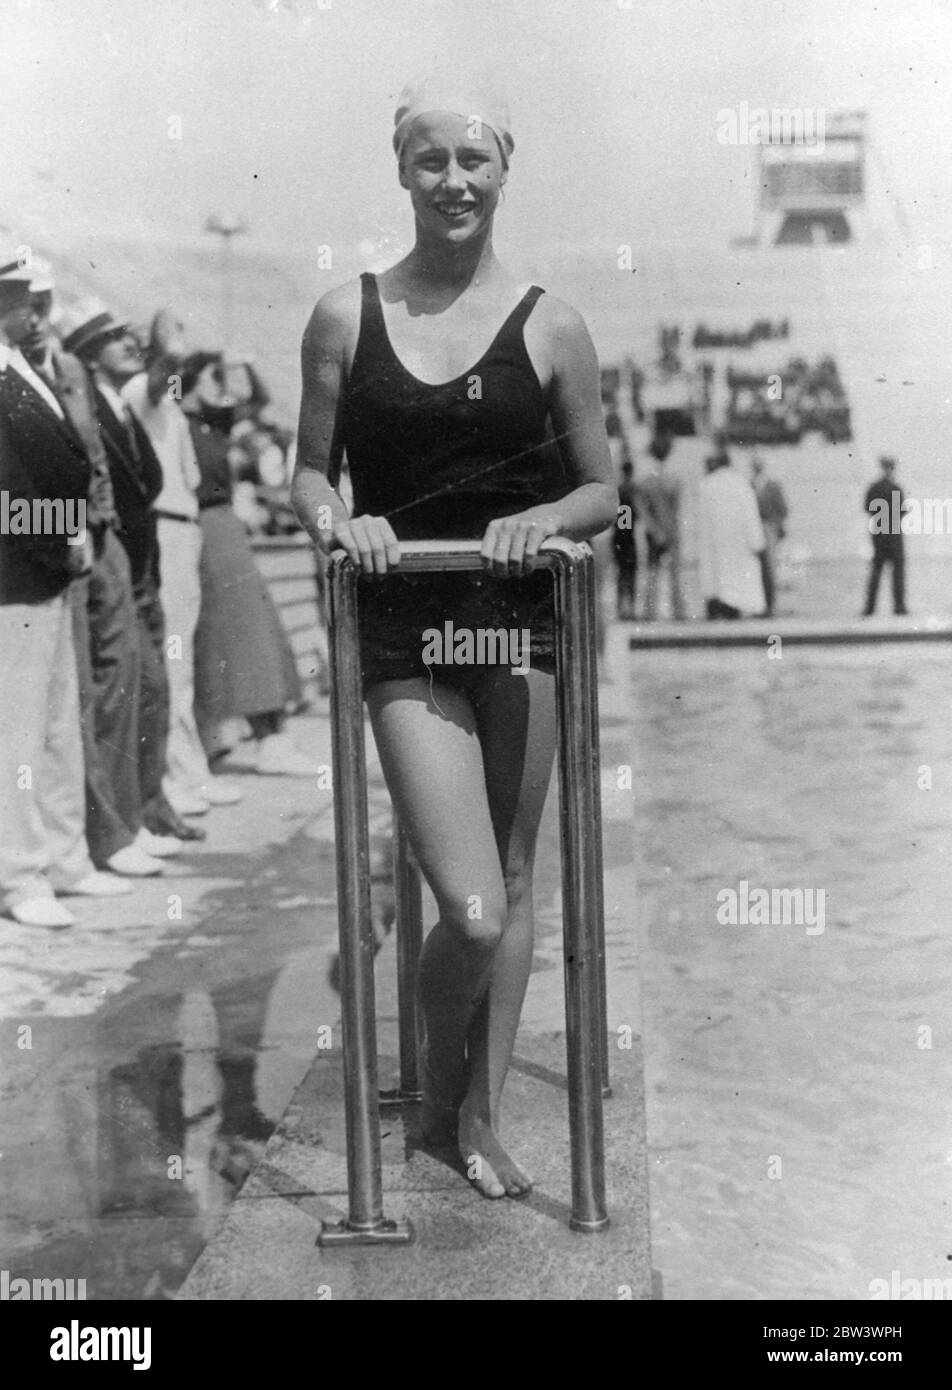 Youngest Member Of America ' s Olympic Diving Team . Thirteen - year - old Marjorie Gestring of Los Angeles , youngest member of America ' s diving team for the 1936 Olympic Games , is putting in final practise with other members in Berlin before the opening of the Games next week . In the Olympic try - out held in New York , Majorie finished second , only one - tenth of a point behind the winner . Photo shows : Smiling Marjorie Gestring coming up from the Stadium Pool after a practise dive . 31 Jul 1936 Stock Photo